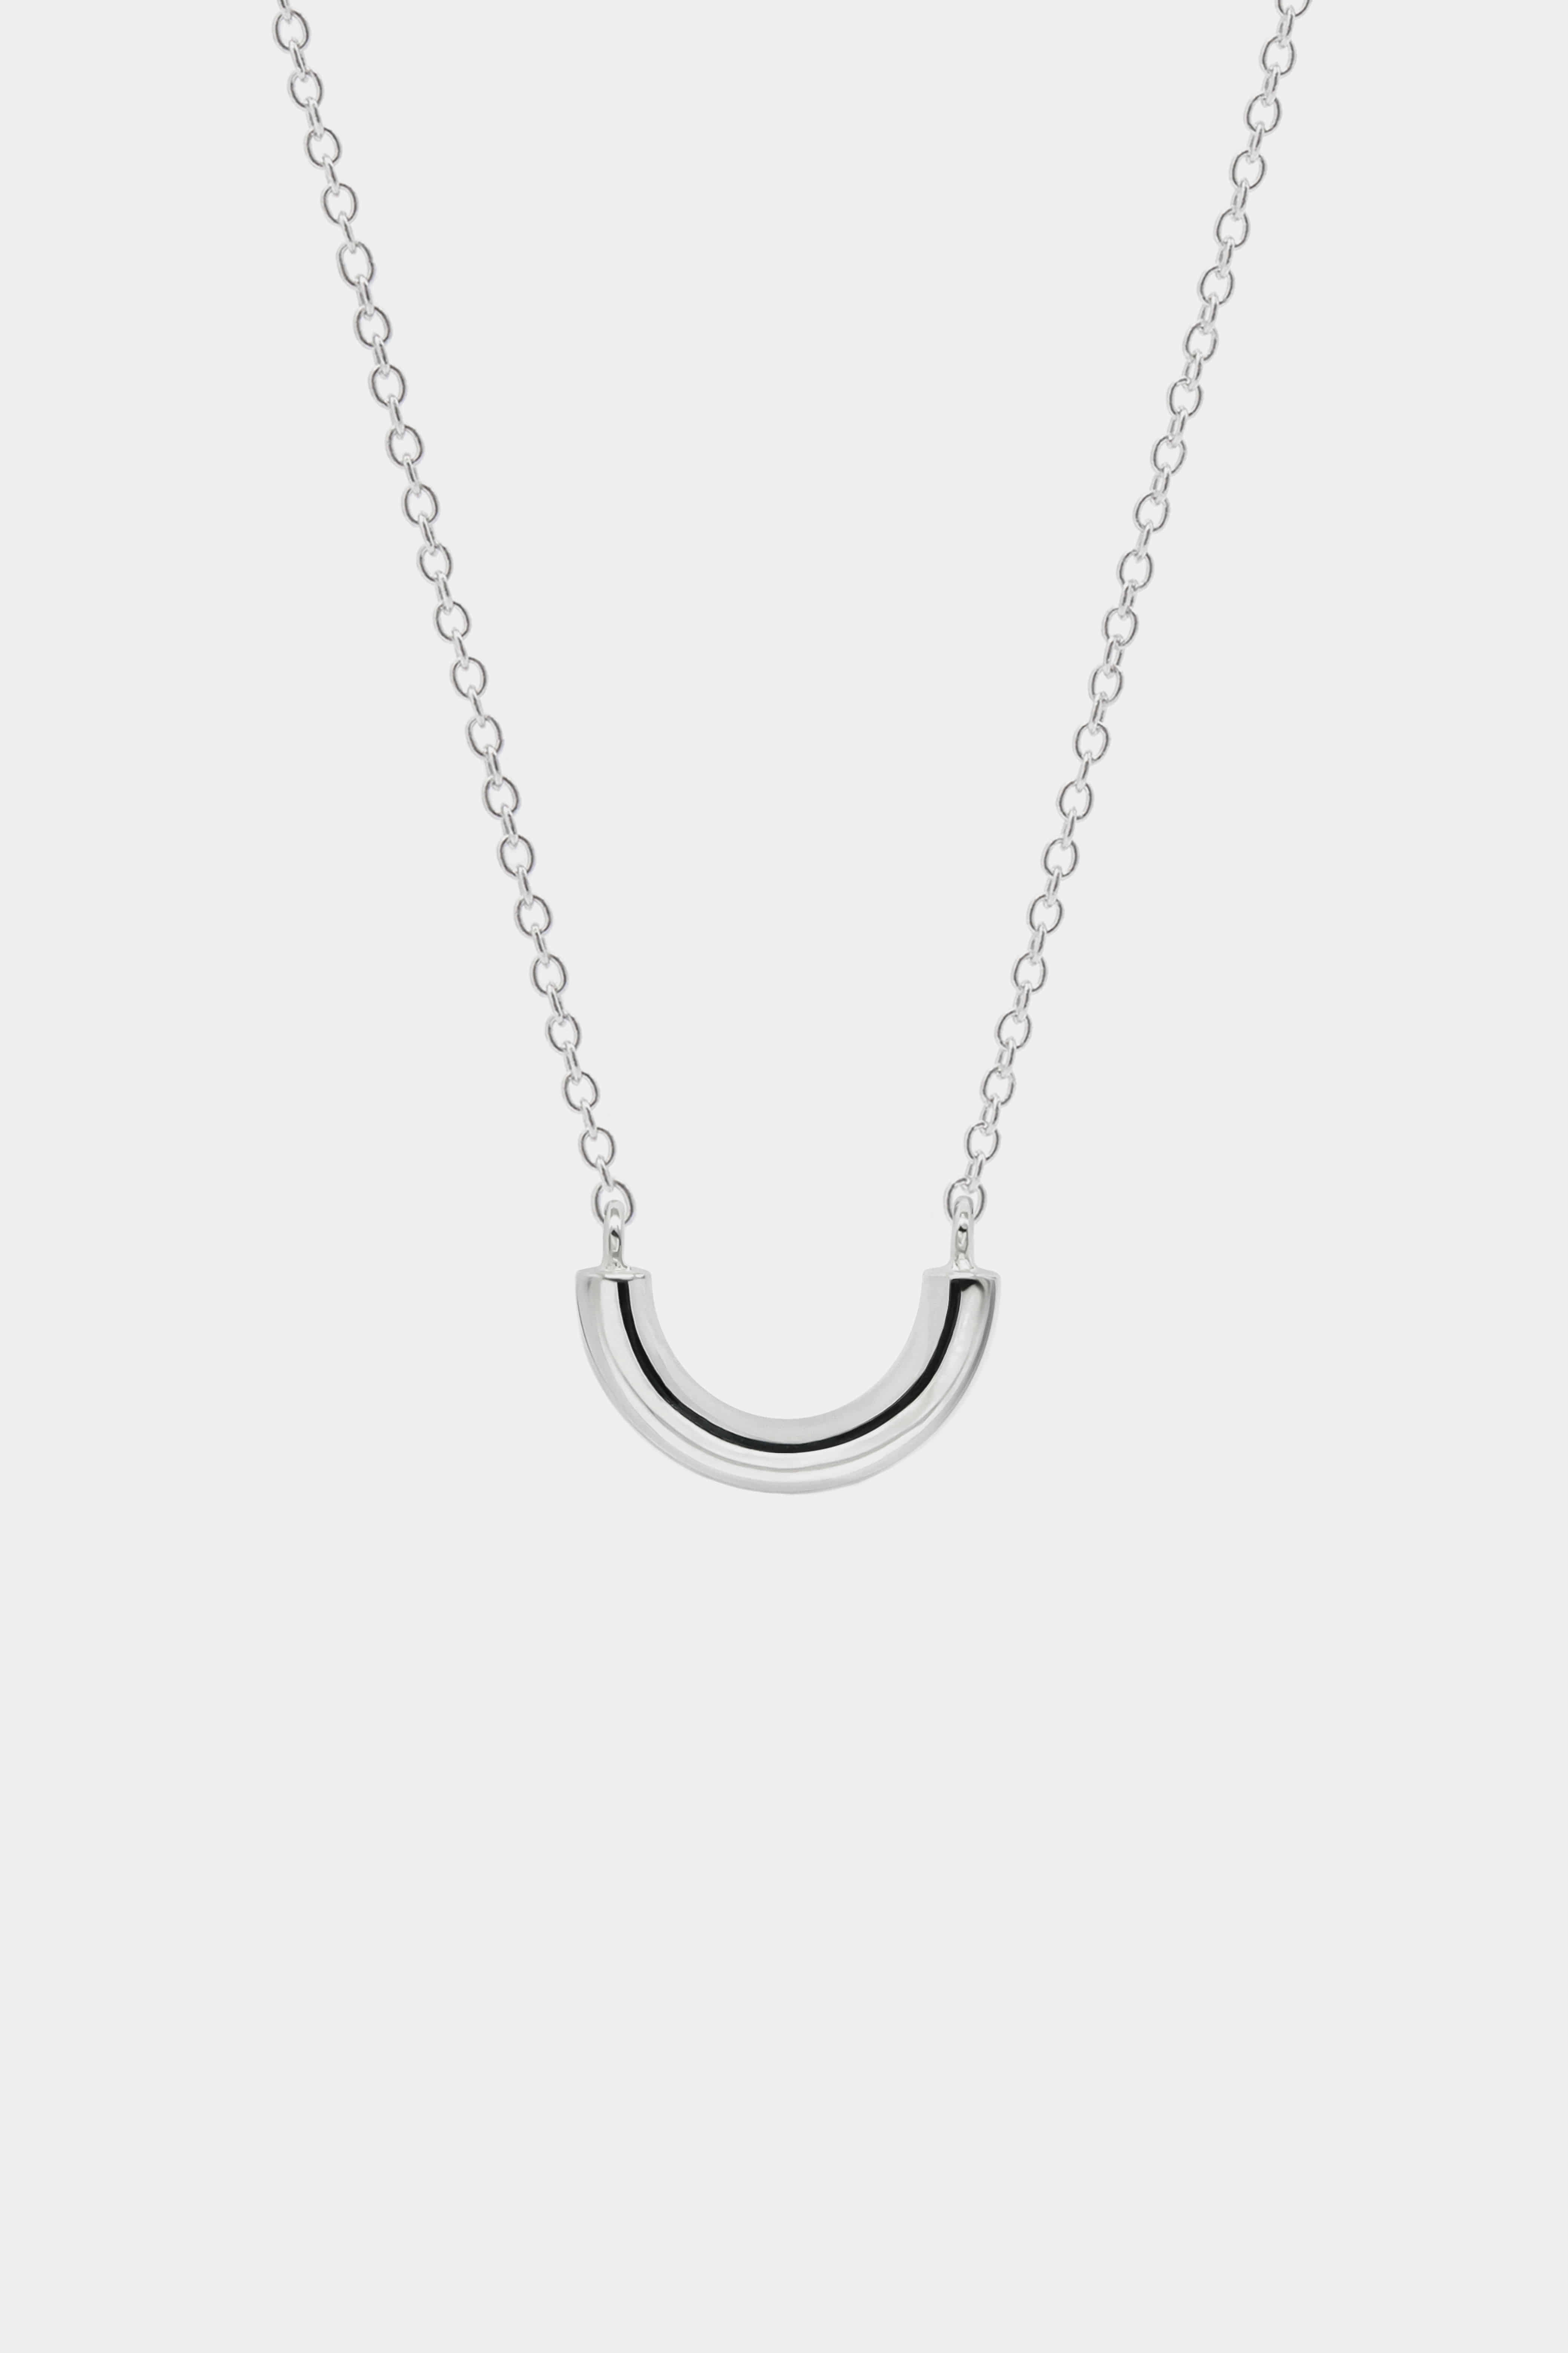 U pipe necklace - fixed